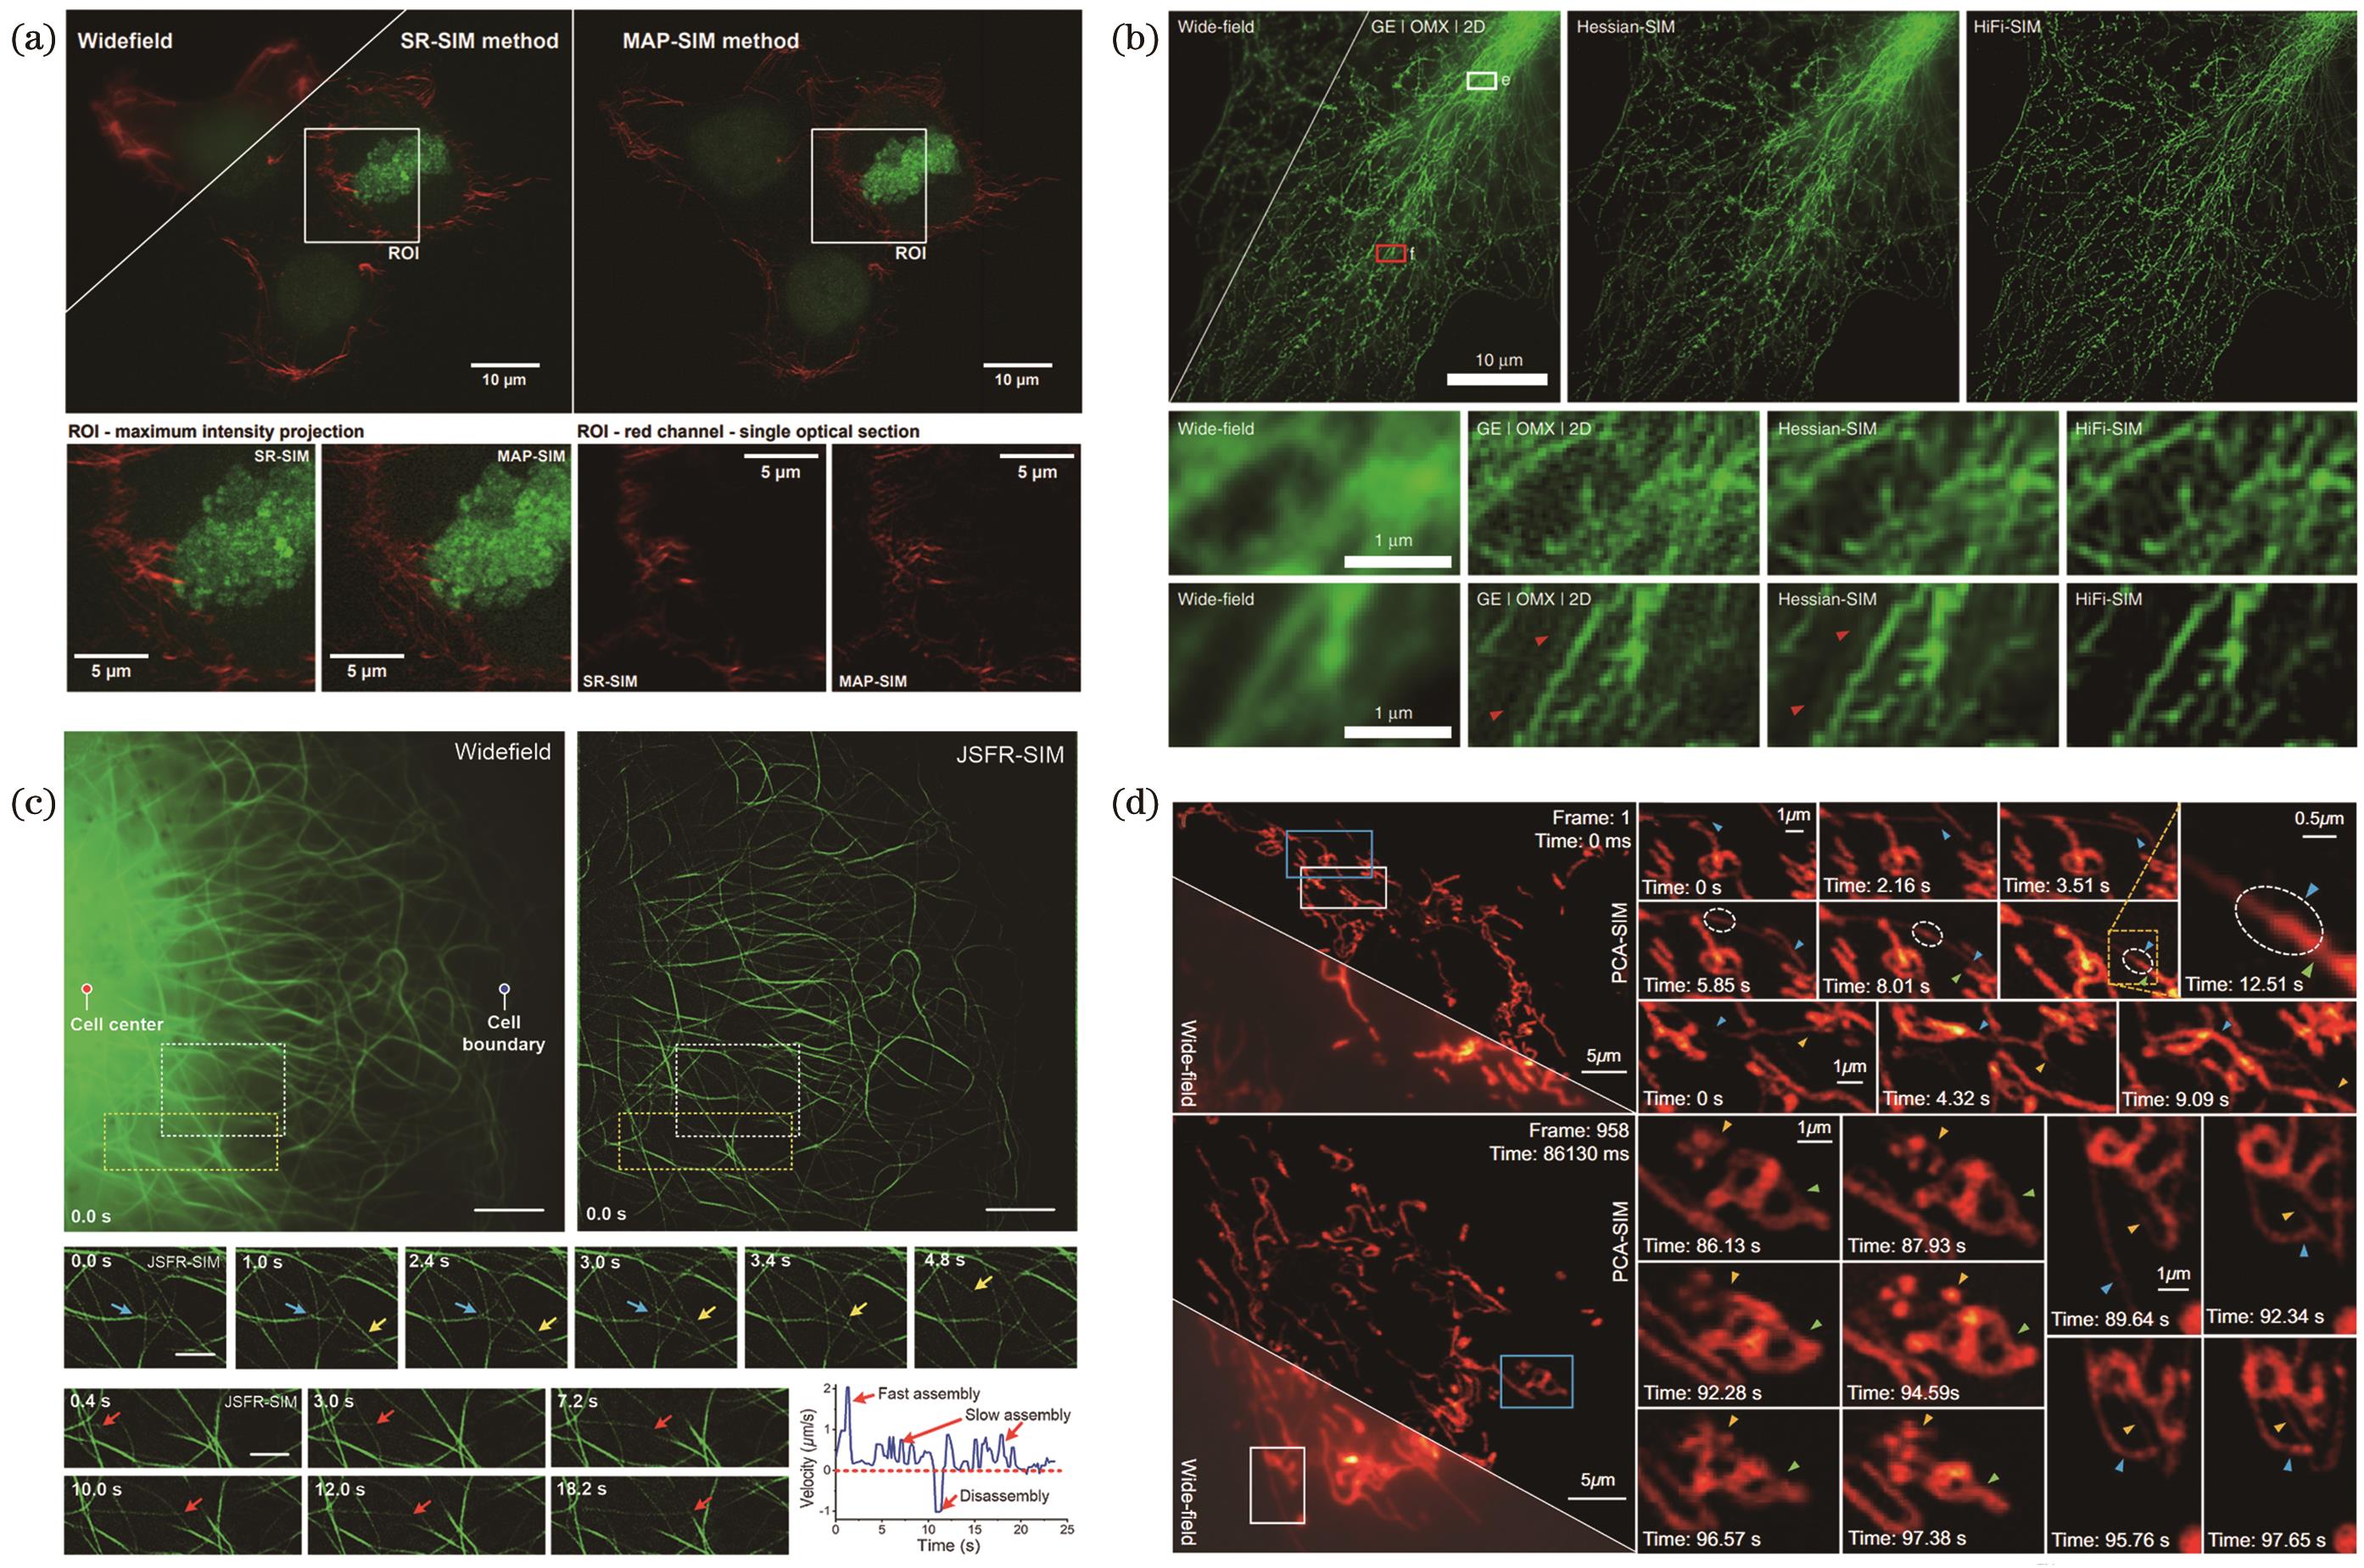 Super-resolution imaging results based on deconvolution algorithms in structured illumination microscopy. (a) Dual-color three-dimensional super-resolution images of actin (magenta) and chromatin (green) based on MAP-SIM[33]; (b) HiFi-SIM reconstruction of microtubules in COS-7 cells[35]; (c) visualization of microtubule dynamics based on JSFR-SIM[36]; (d) super-resolution reconstruction of dynamic processes in COS-7 mitochondria based on PCA-SIM[37]